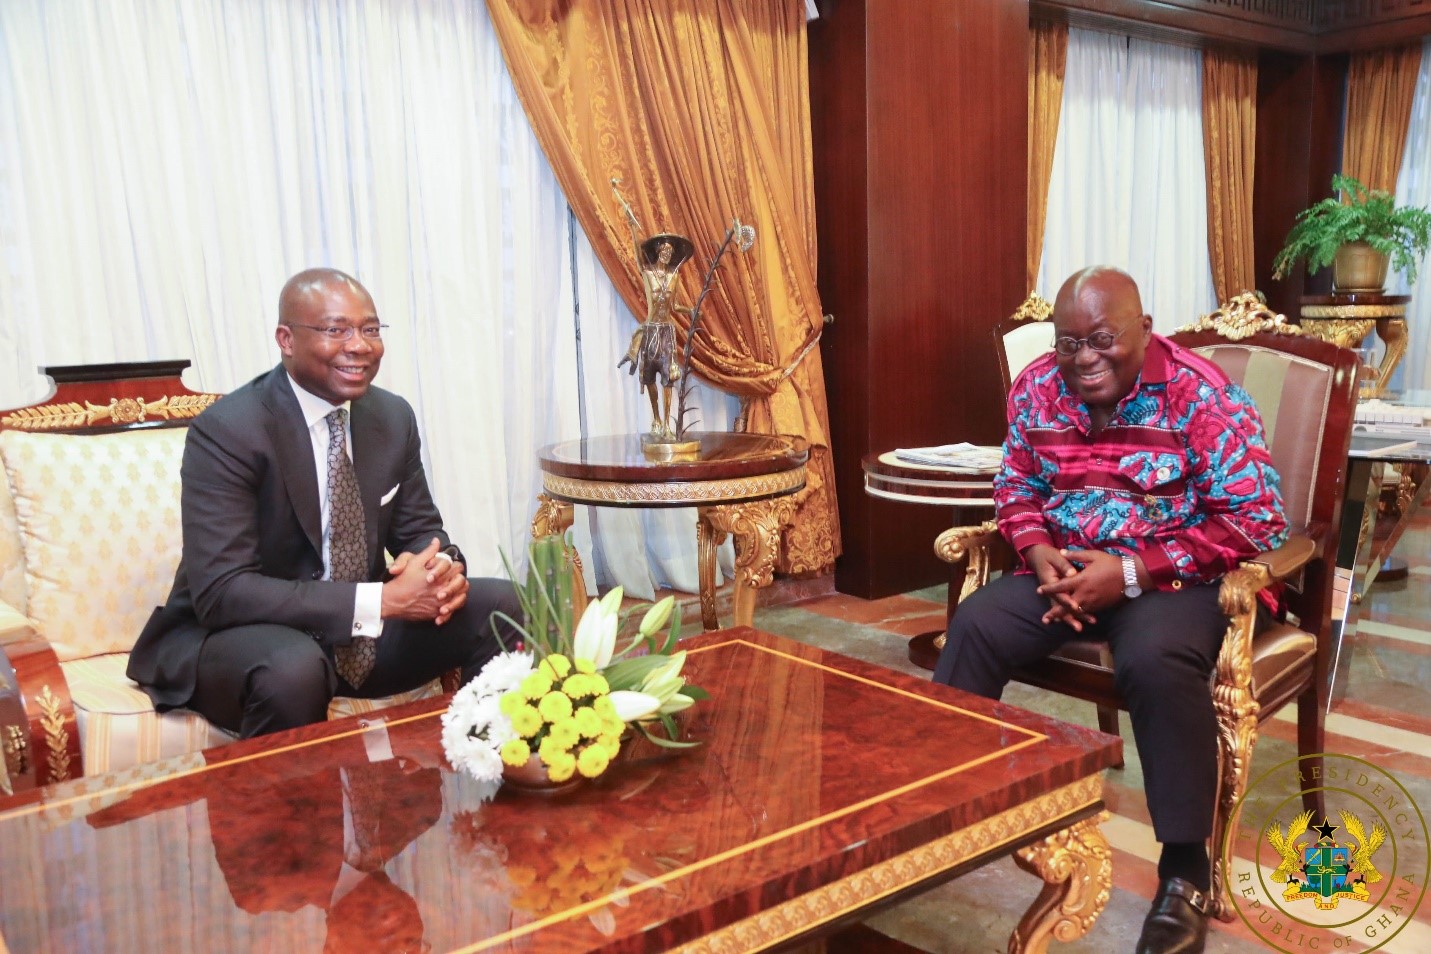 President Akufo-Addo in a chat with Mr. Aigboje Aig-Imoukhuede, Founder and Chairman of the Africa Initiative for Governance